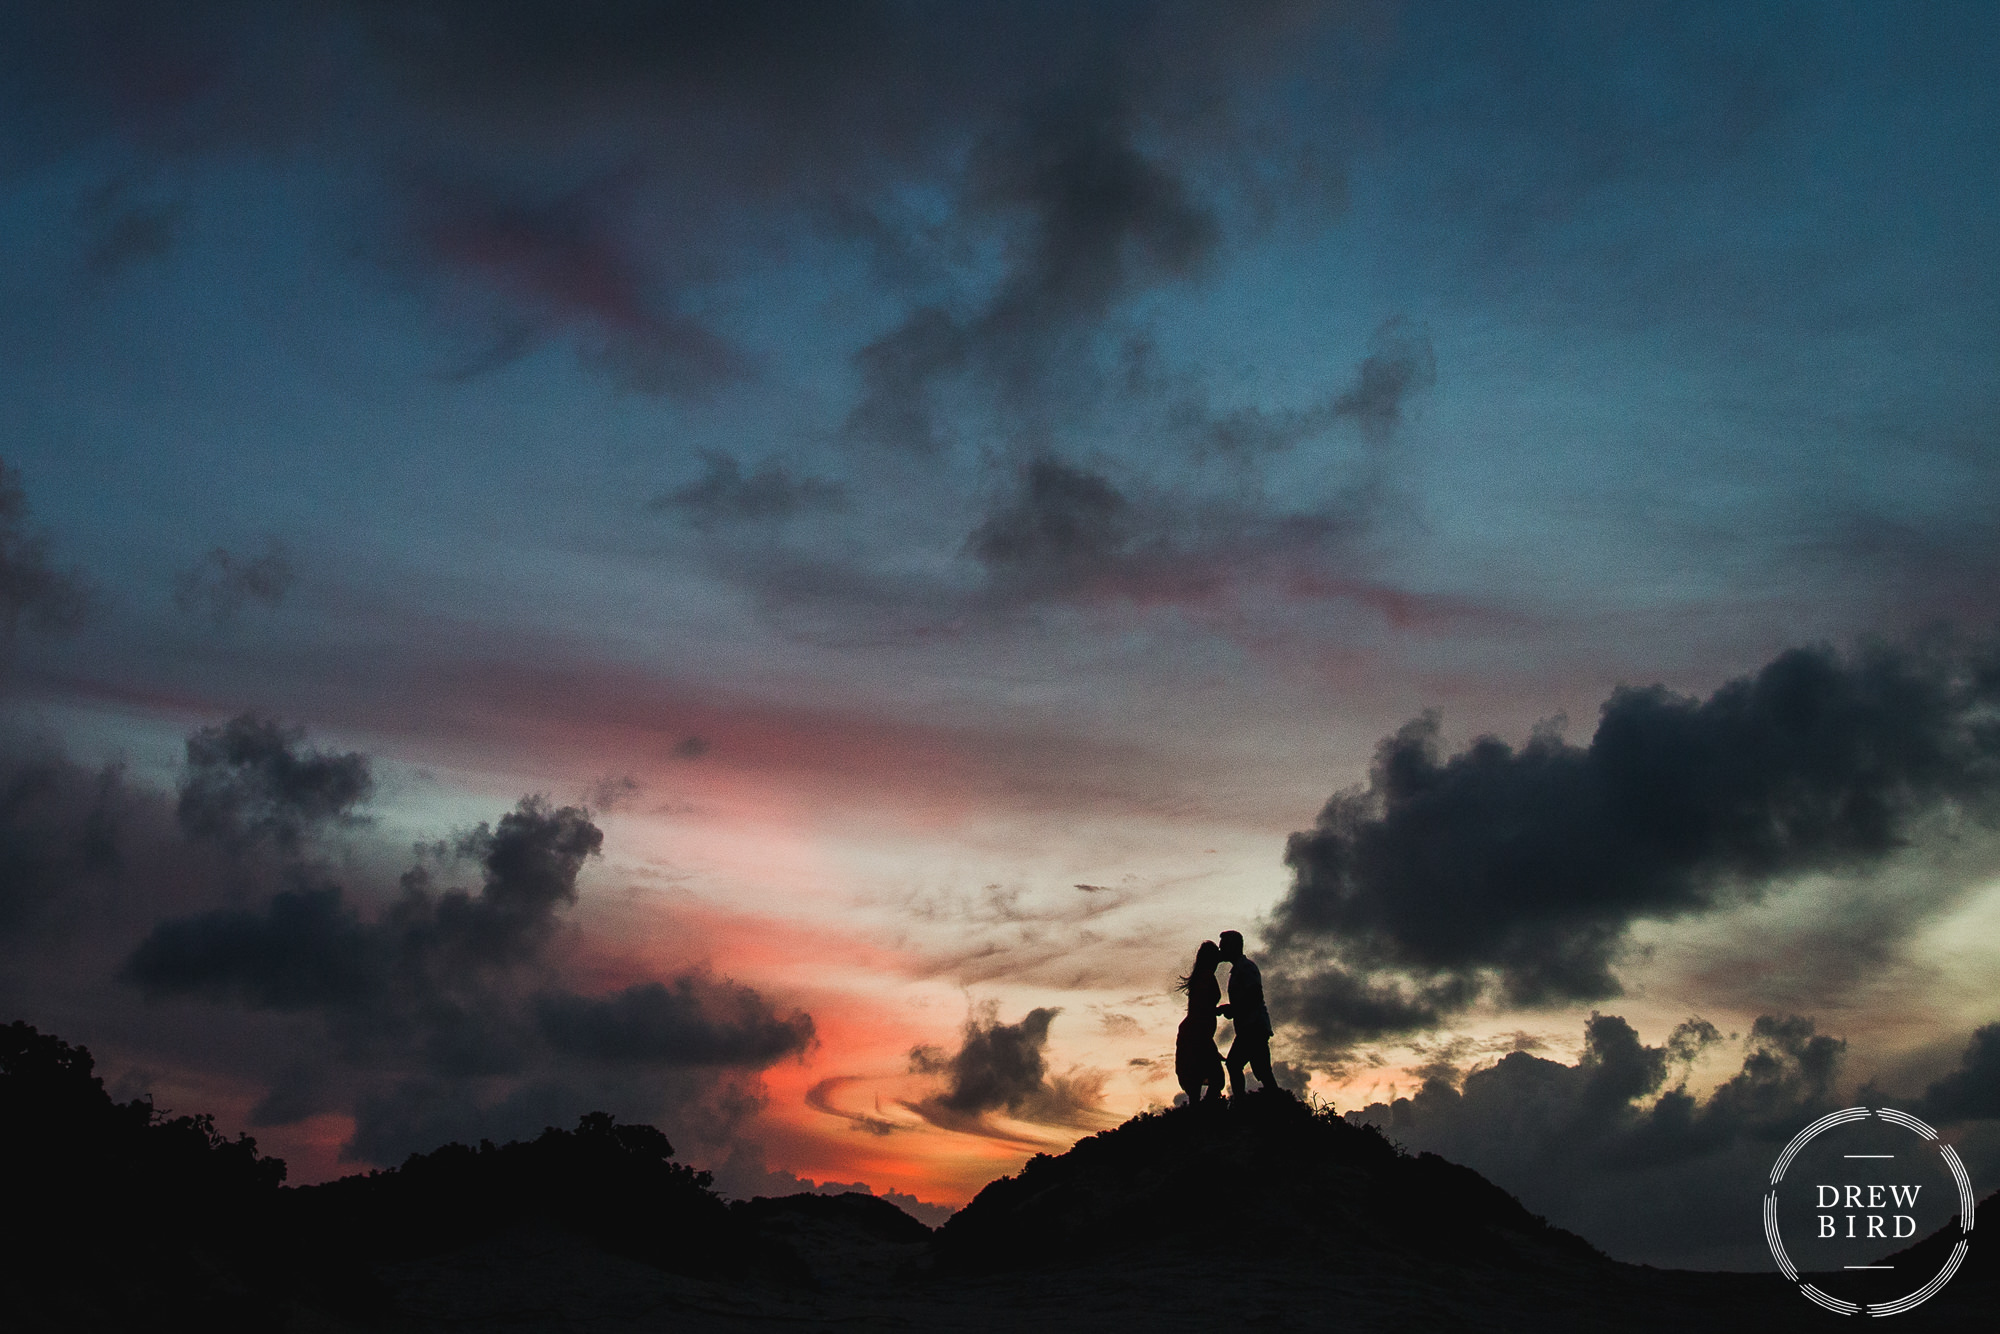 A gorgeous portrait of the indian wedding couple at sunset. The bride and groom are standing on top of a sand dune with an epic sunset in the background. Professional wedding photography by Drew Bird at Tierra del Sol on the Caribbean Island of Aruba.